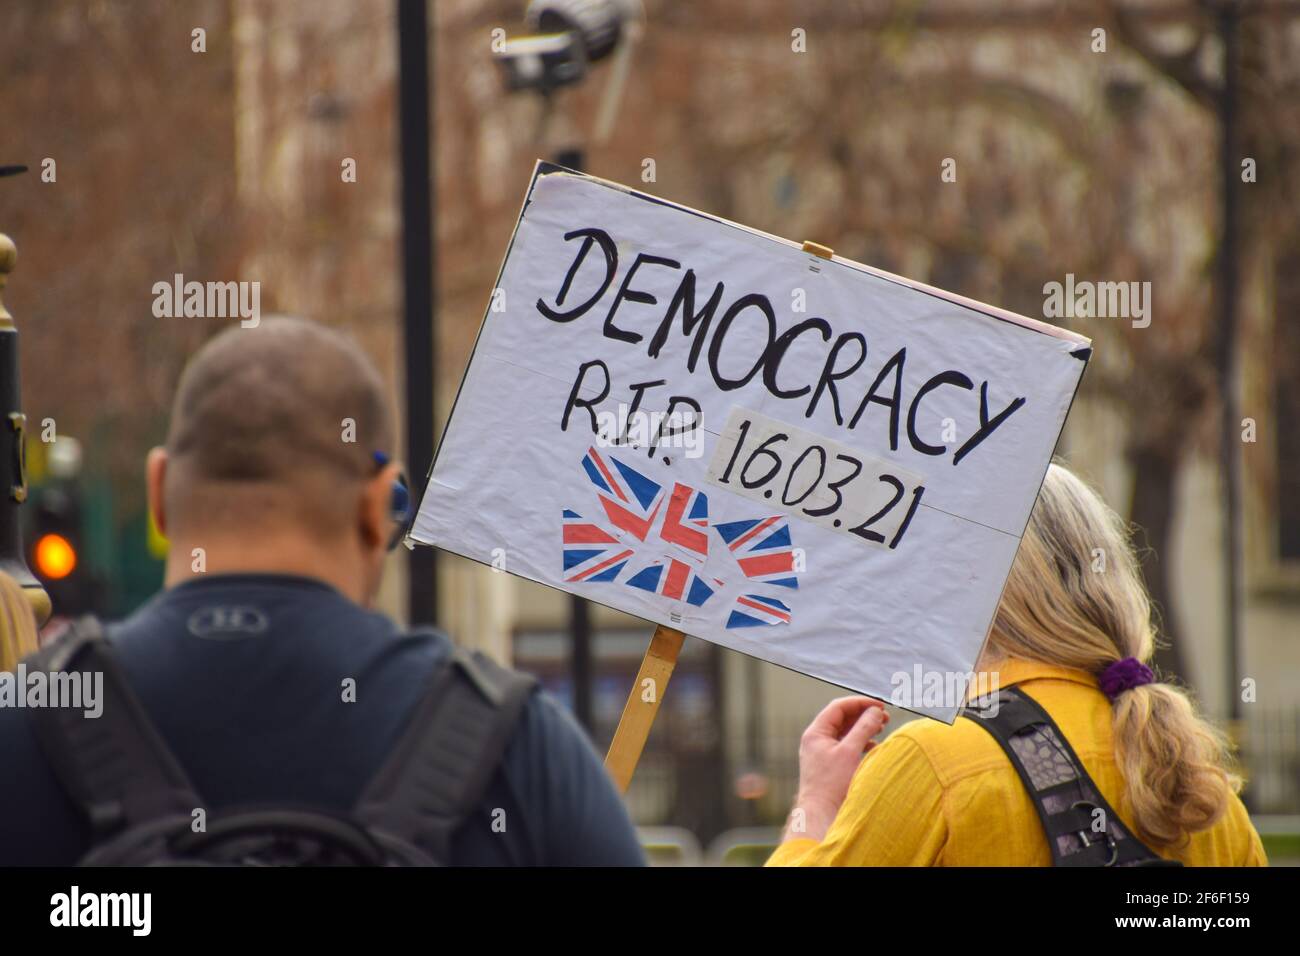 London, United Kingdom. 31st March 2021. A protester holds a placard that reads 'Democracy R.I.P. 16.03.21' in reference to the Police, Crime, Sentencing and Courts Bill. A handful of demonstrators gathered outside the parliament to protest the new police bill, government's handling of Covid, Brexit and plastic pollution. Credit: Vuk Valcic/Alamy Live News Stock Photo